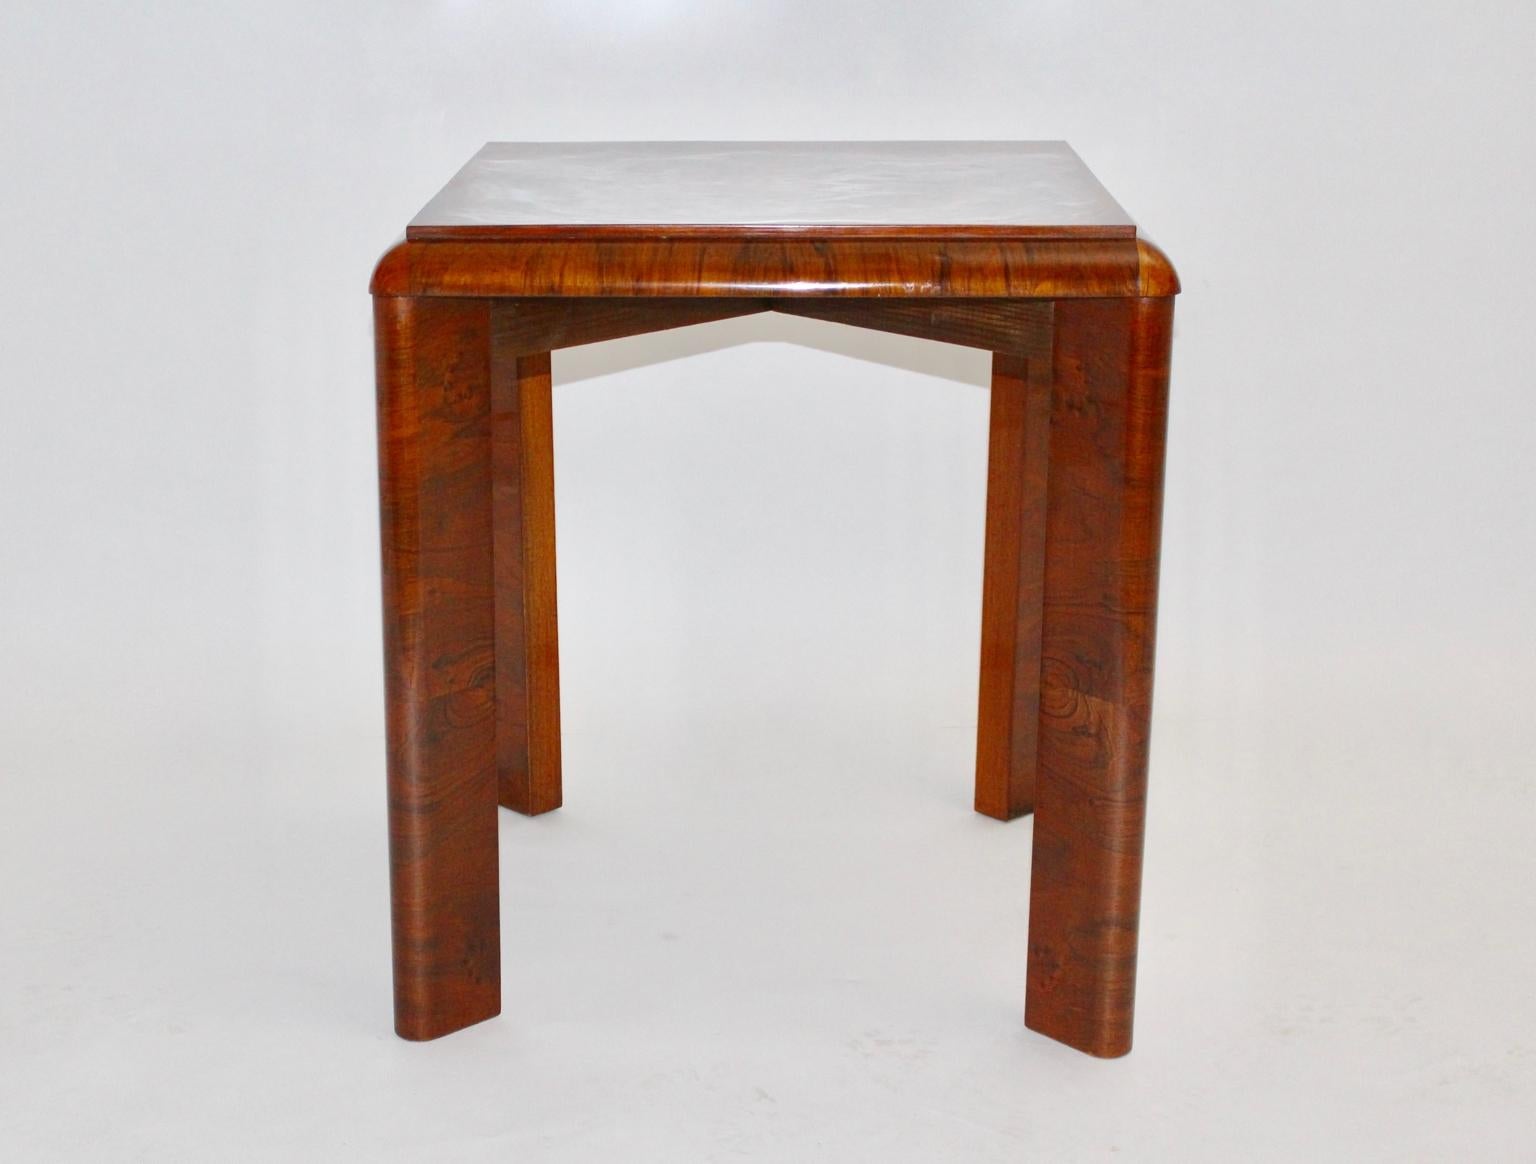 This square side table was made of spruce and walnut veneer.
The top shows a very beautiful walnut veneer with burl wood - carefully hand polished.

approx.measures:
Width 59 cm
Depth 59 cm
Height 66.5 cm
all measures are approximate